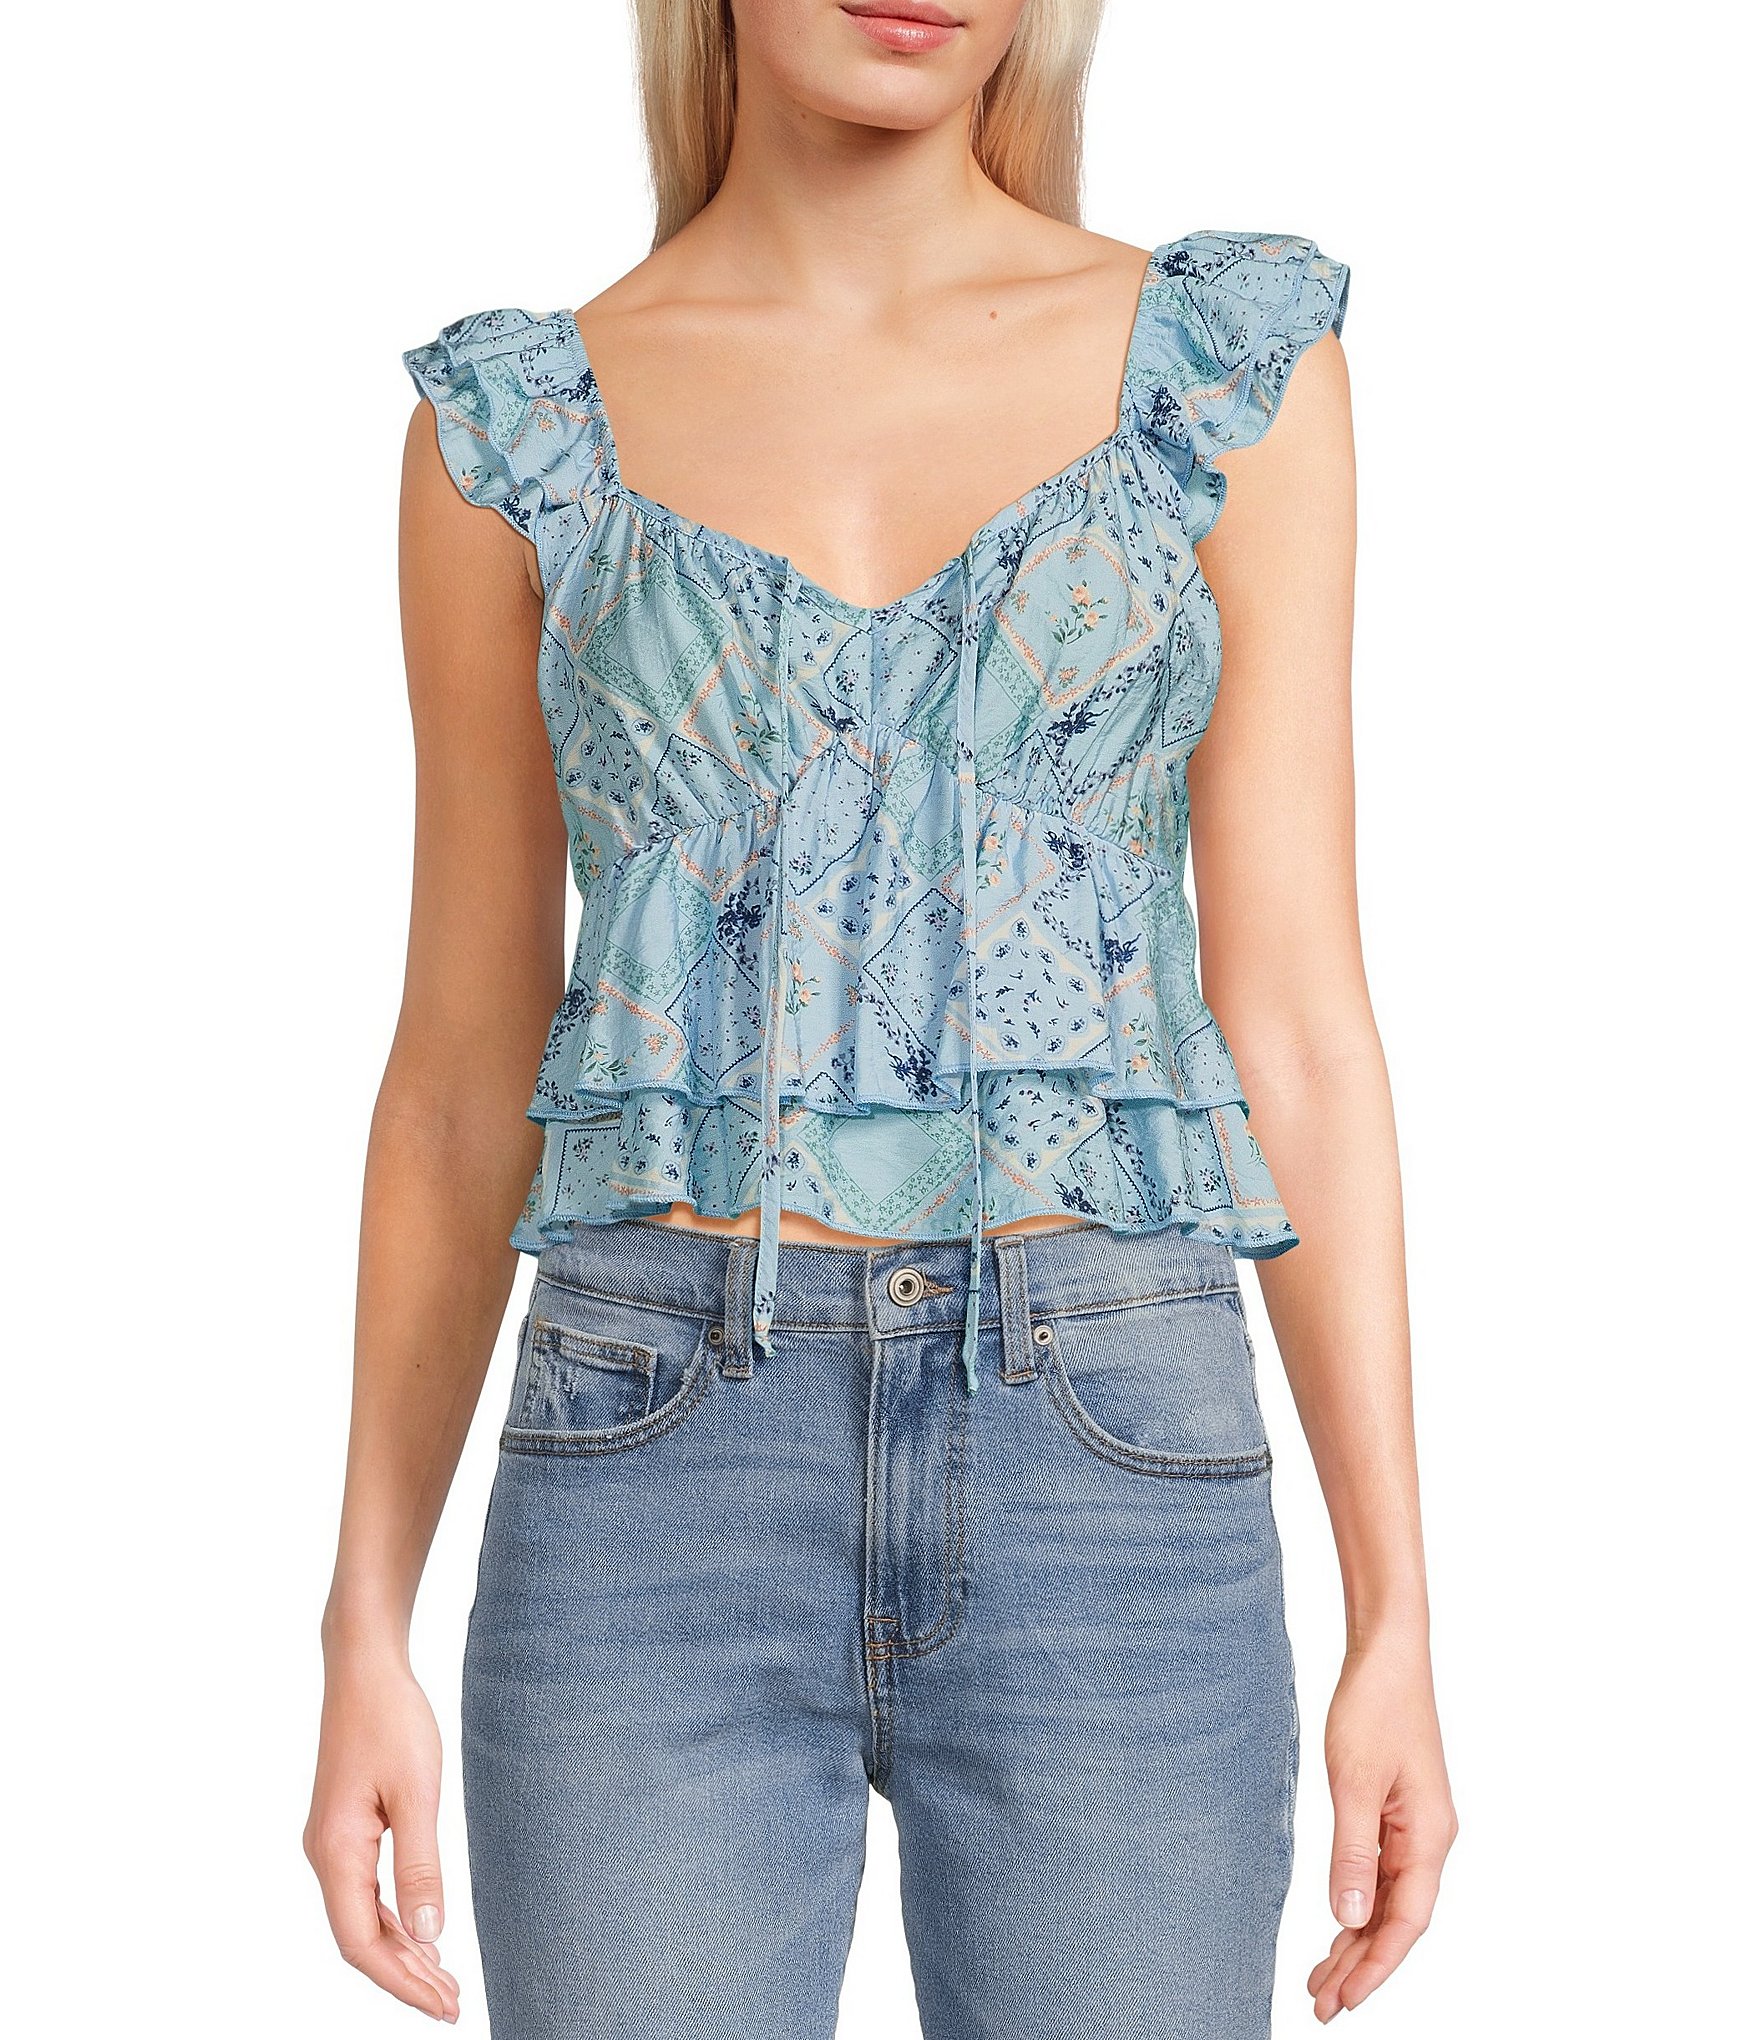 Ava Woven Lace Corset Top